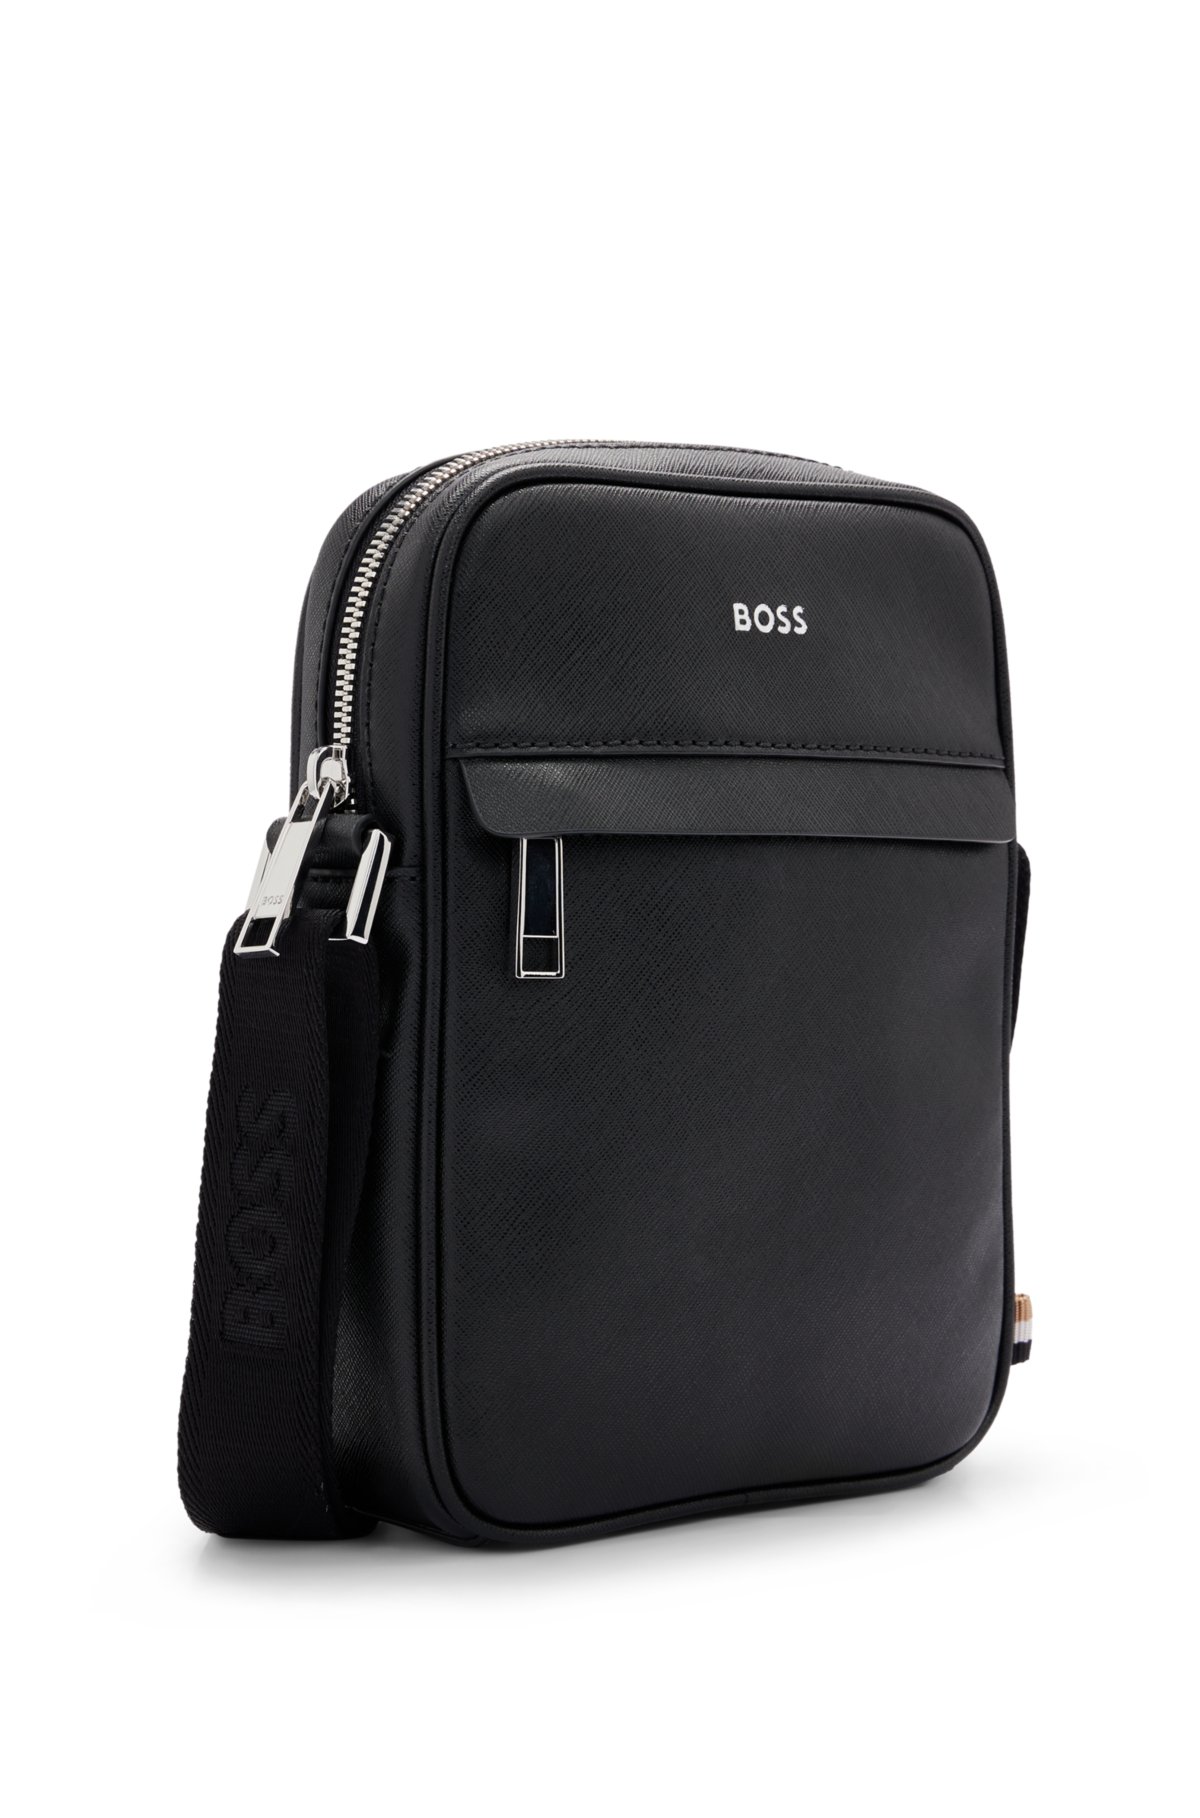 Reporter bag with signature stripe and logo detail, Black